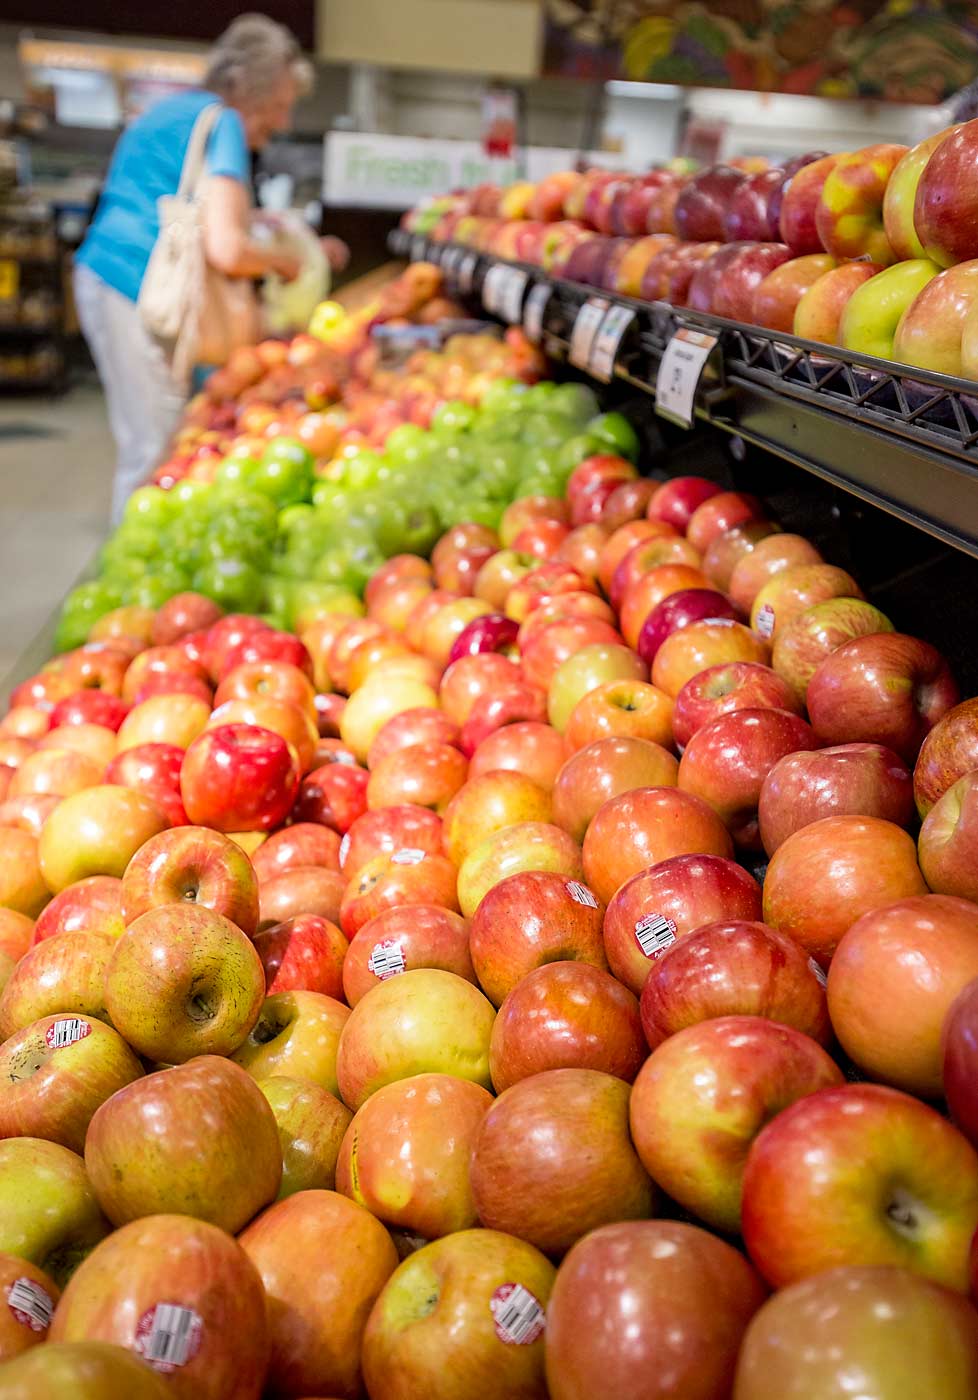 Randy Riley, director of produce merchandising for The Kroger Co., said there are too many apple varieties on grocery store shelves. Several varieties of apples, including these Fuji, are displayed at a Fred Meyer grocery store in Yakima, Washington, in 2015. Fred Meyer is part of Kroger. (TJ Mullinax/Good Fruit Grower)